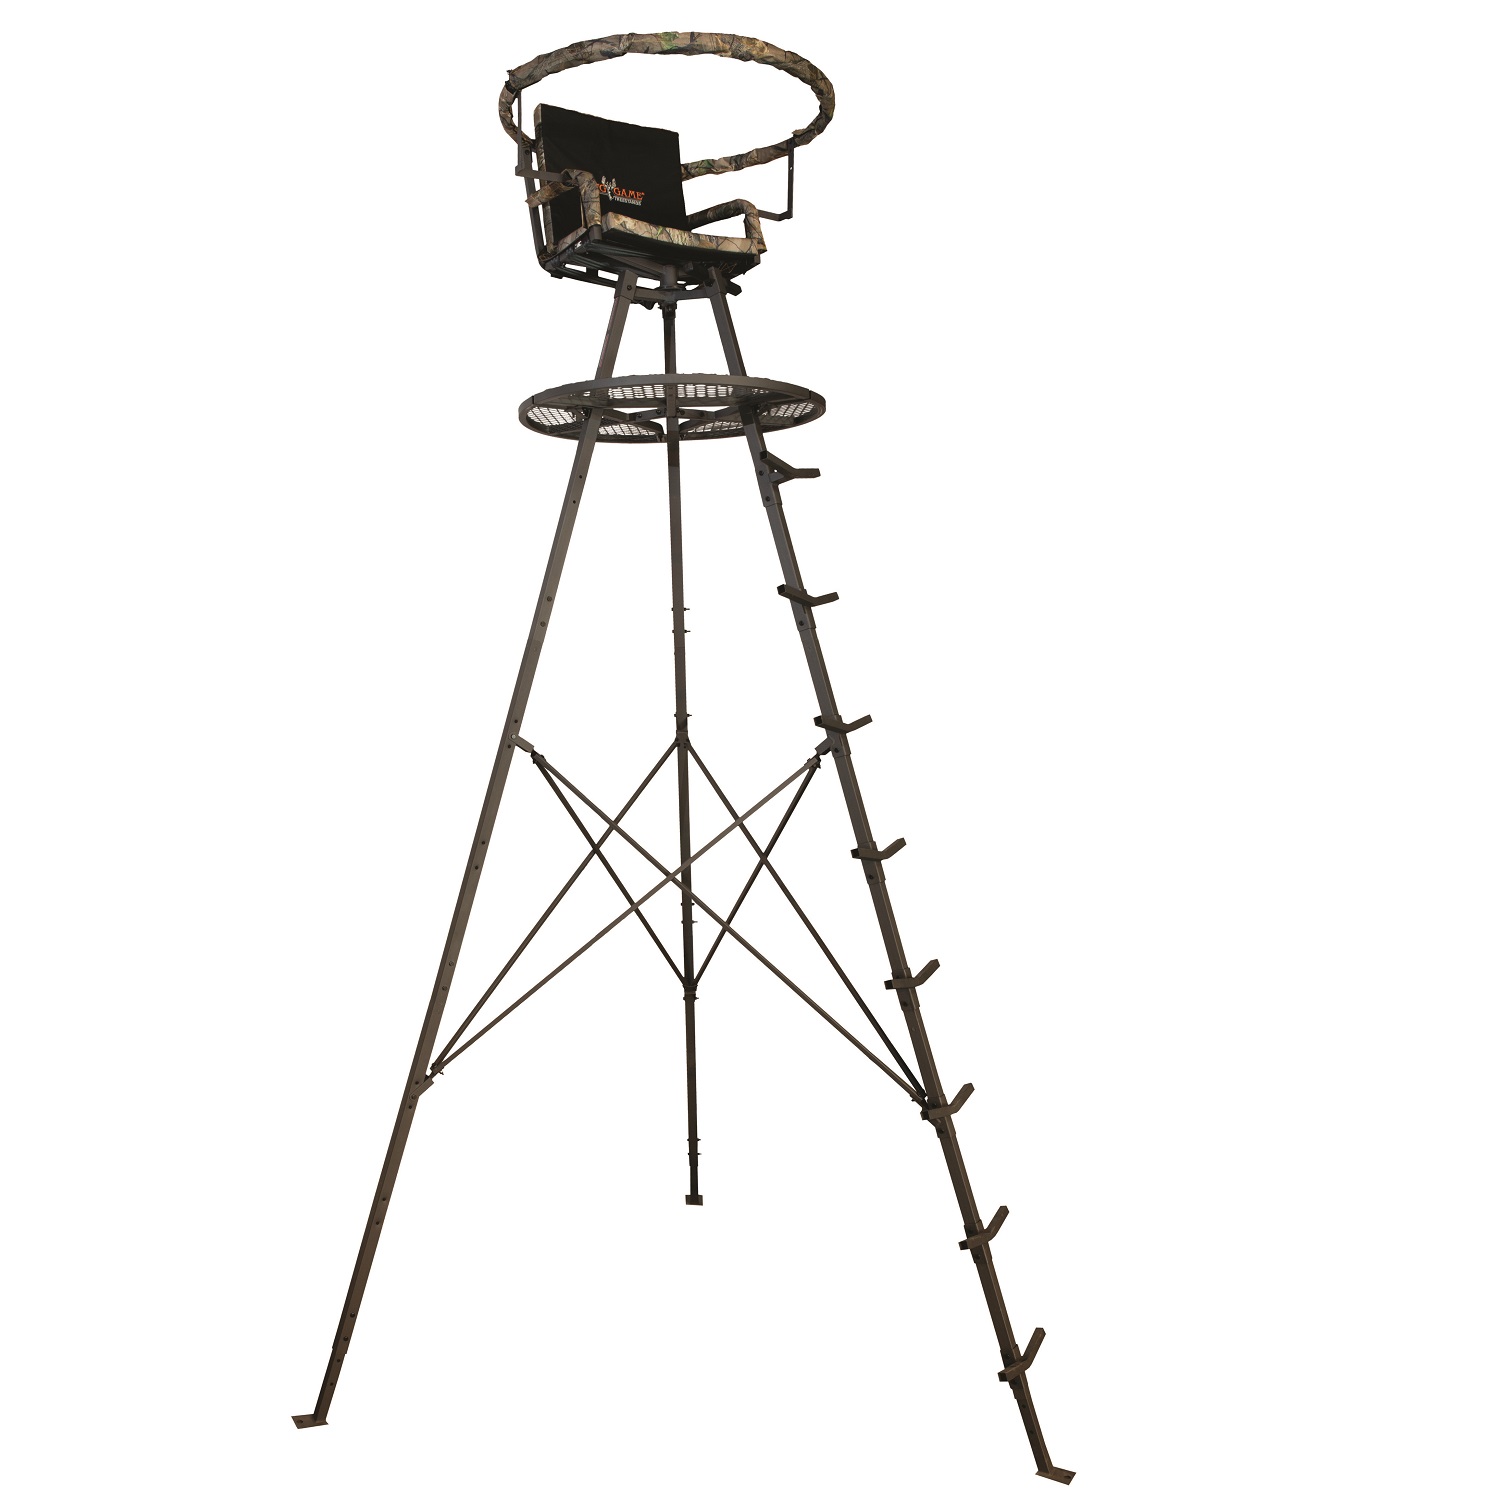 Big Game Treestands Apex Tripod Free Shipping Over 49